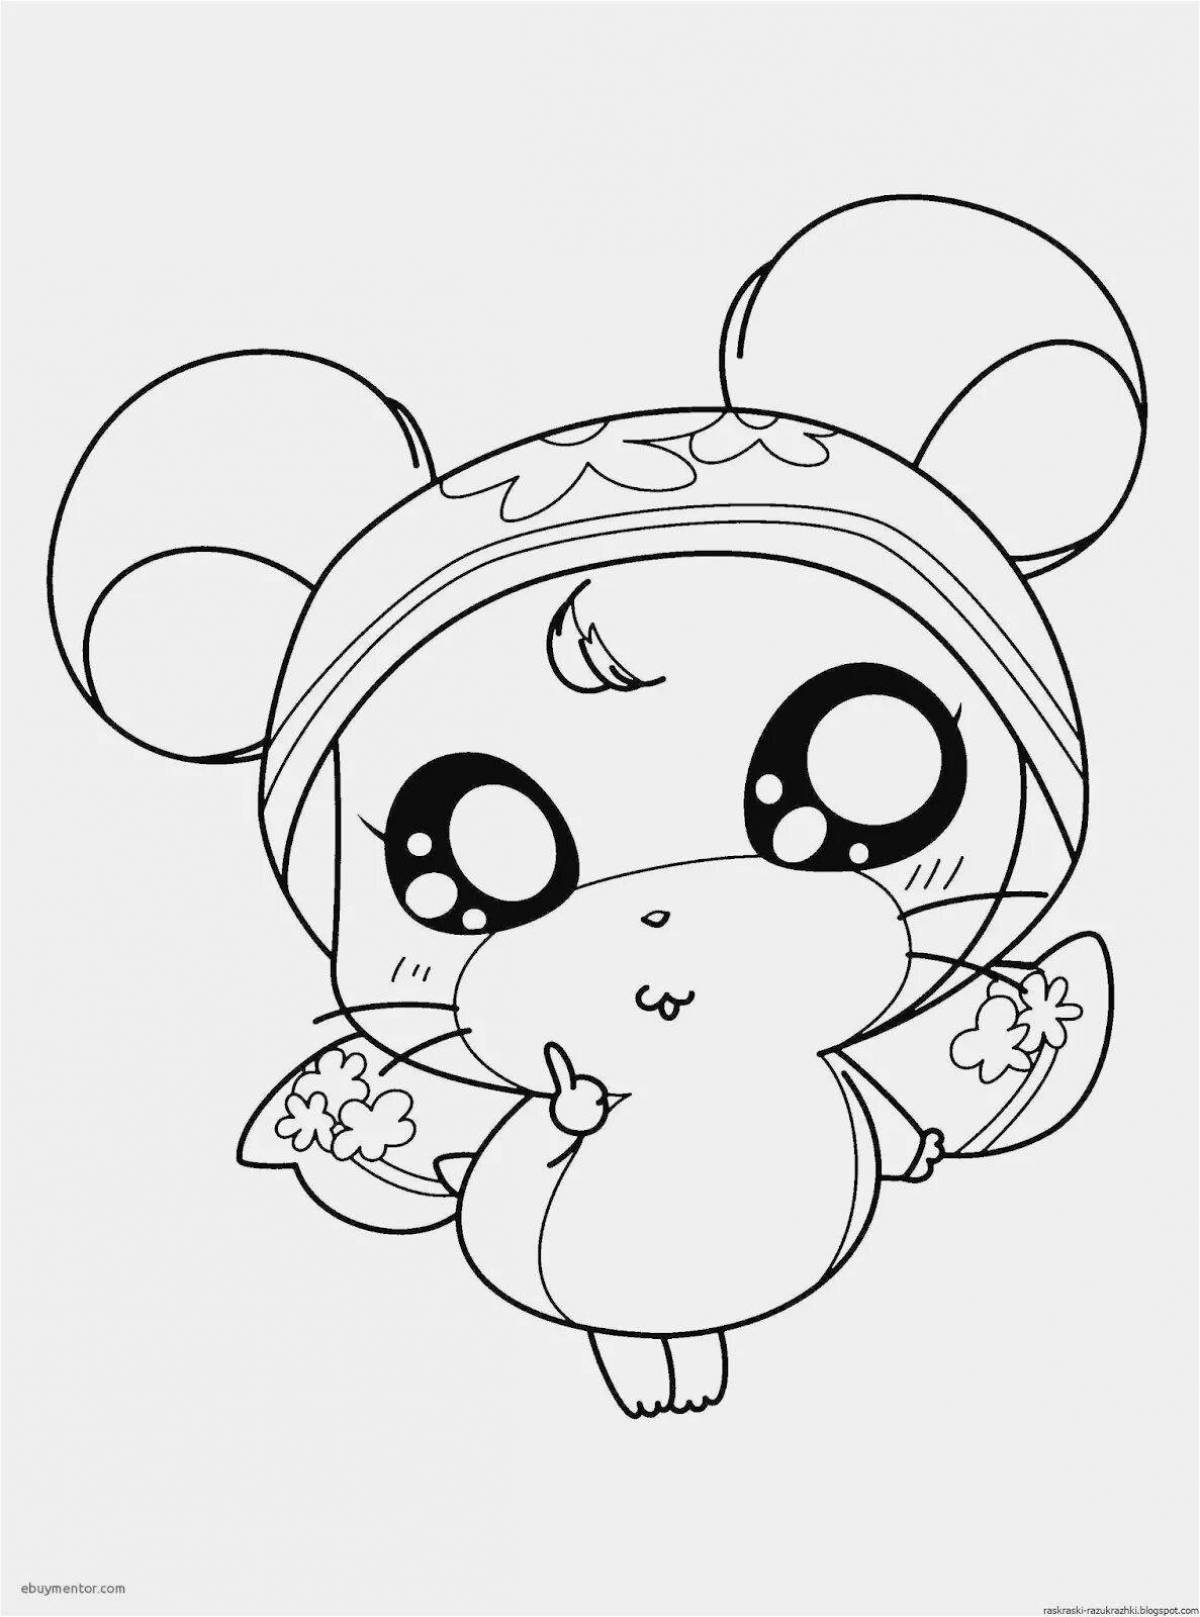 Coloring pages with taste for girls cute animals